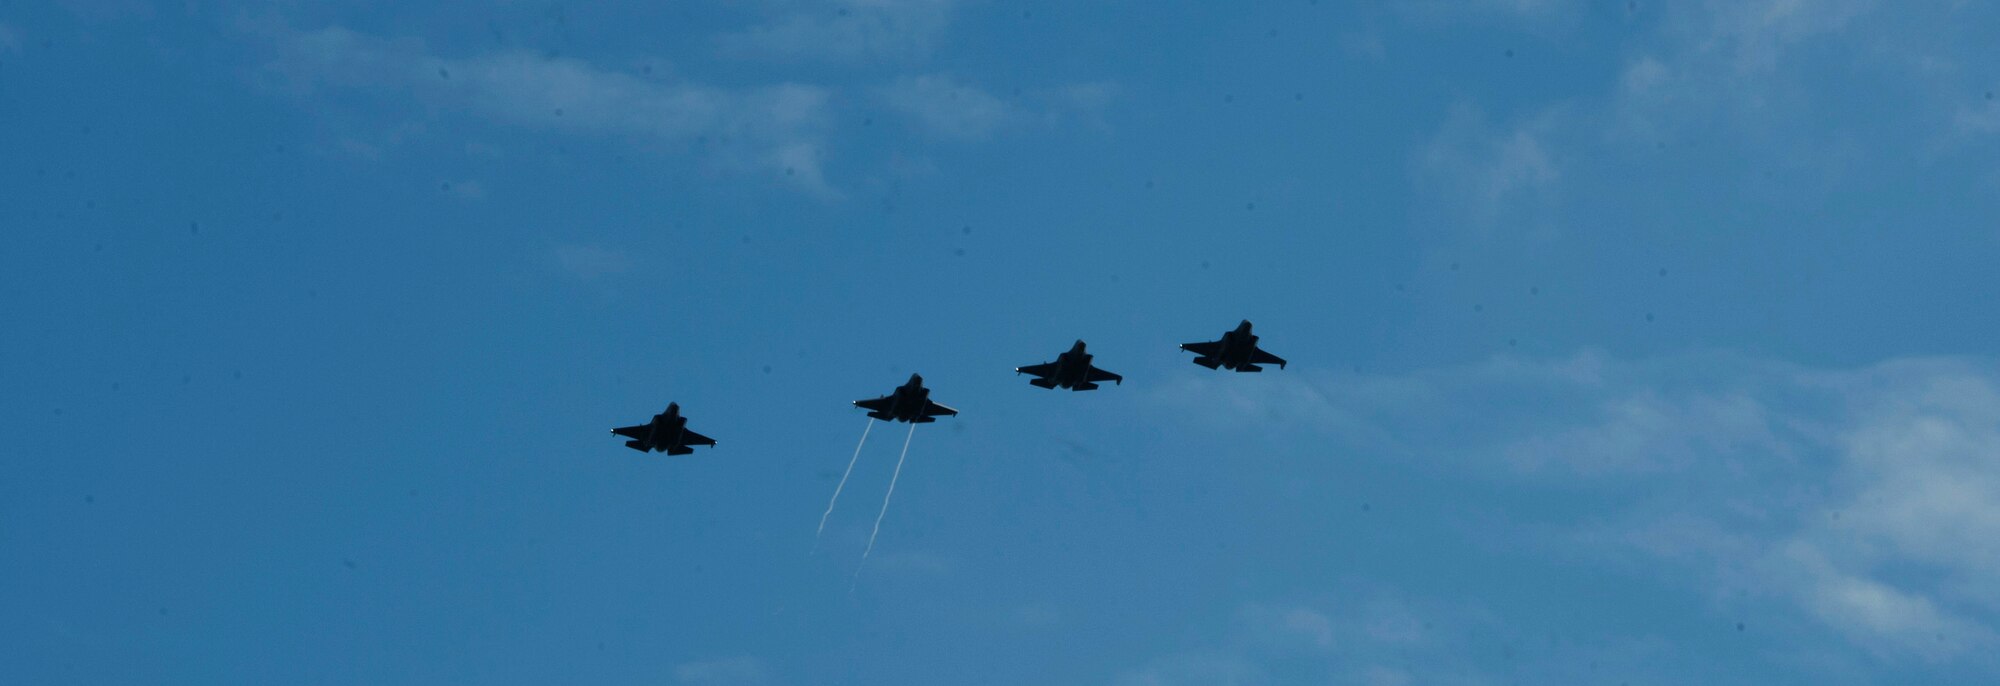 Four U.S. Air Force F-35A Lightning II fighter aircraft, assigned to the 421st Fighter Squadron, Hill Air Force Base, Utah, arrive for training at Spangdahlem Air Base, Germany, June 11, 2019. The Theater Security Package helps demonstrate and exercise the capabilities of the aircraft in various environments, enhancing integration between the U.S. and its allies. (U.S. Air Force photo by Airman 1st Class Jovante Johnson)